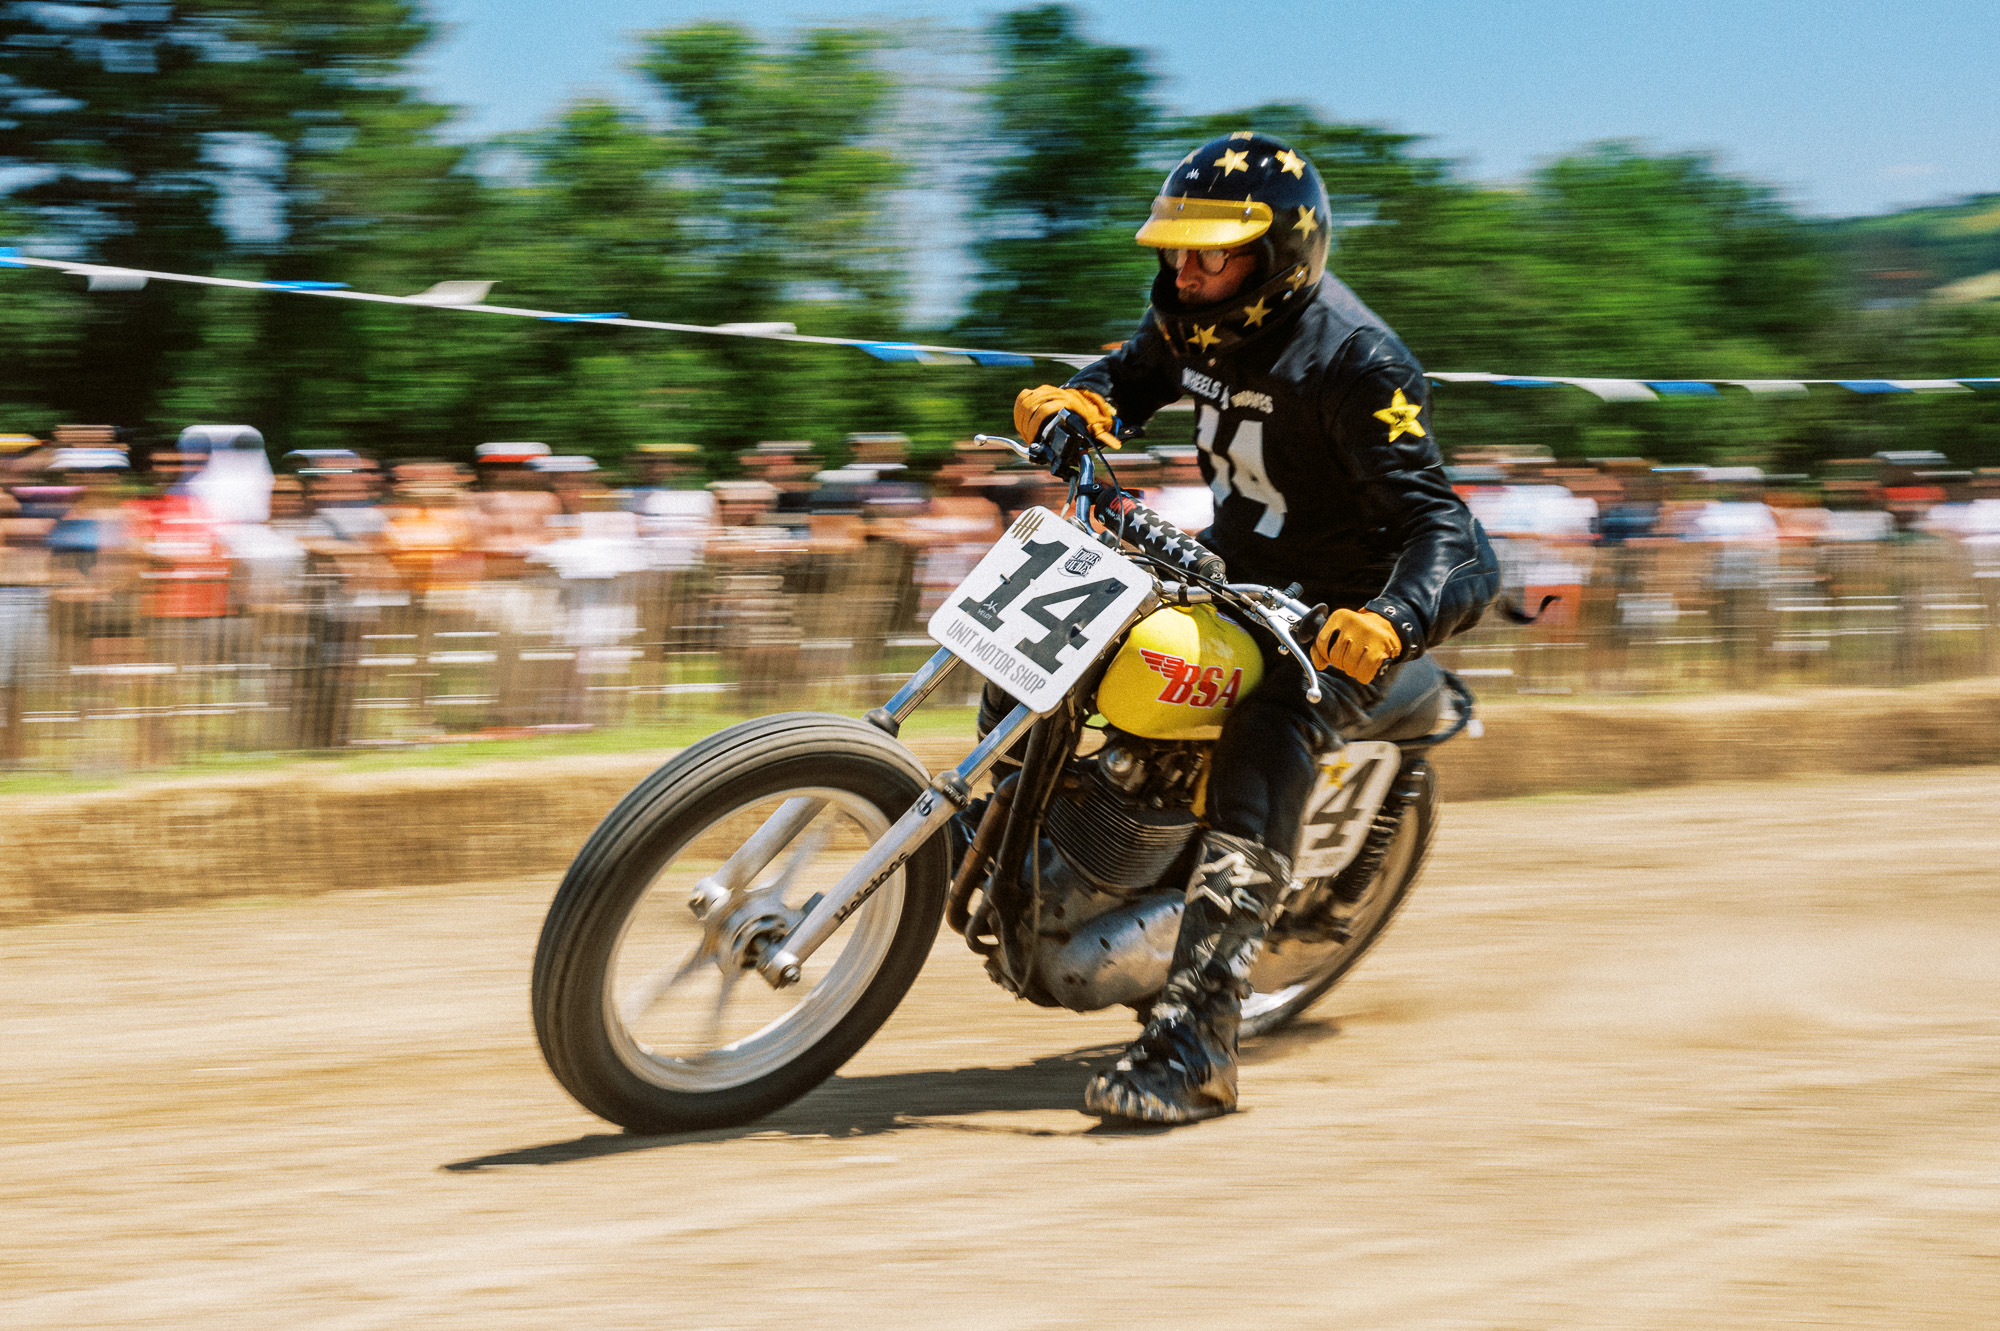 a BSA flat track racer at El Rollo for the Waves Bike Show in Biarritz, France